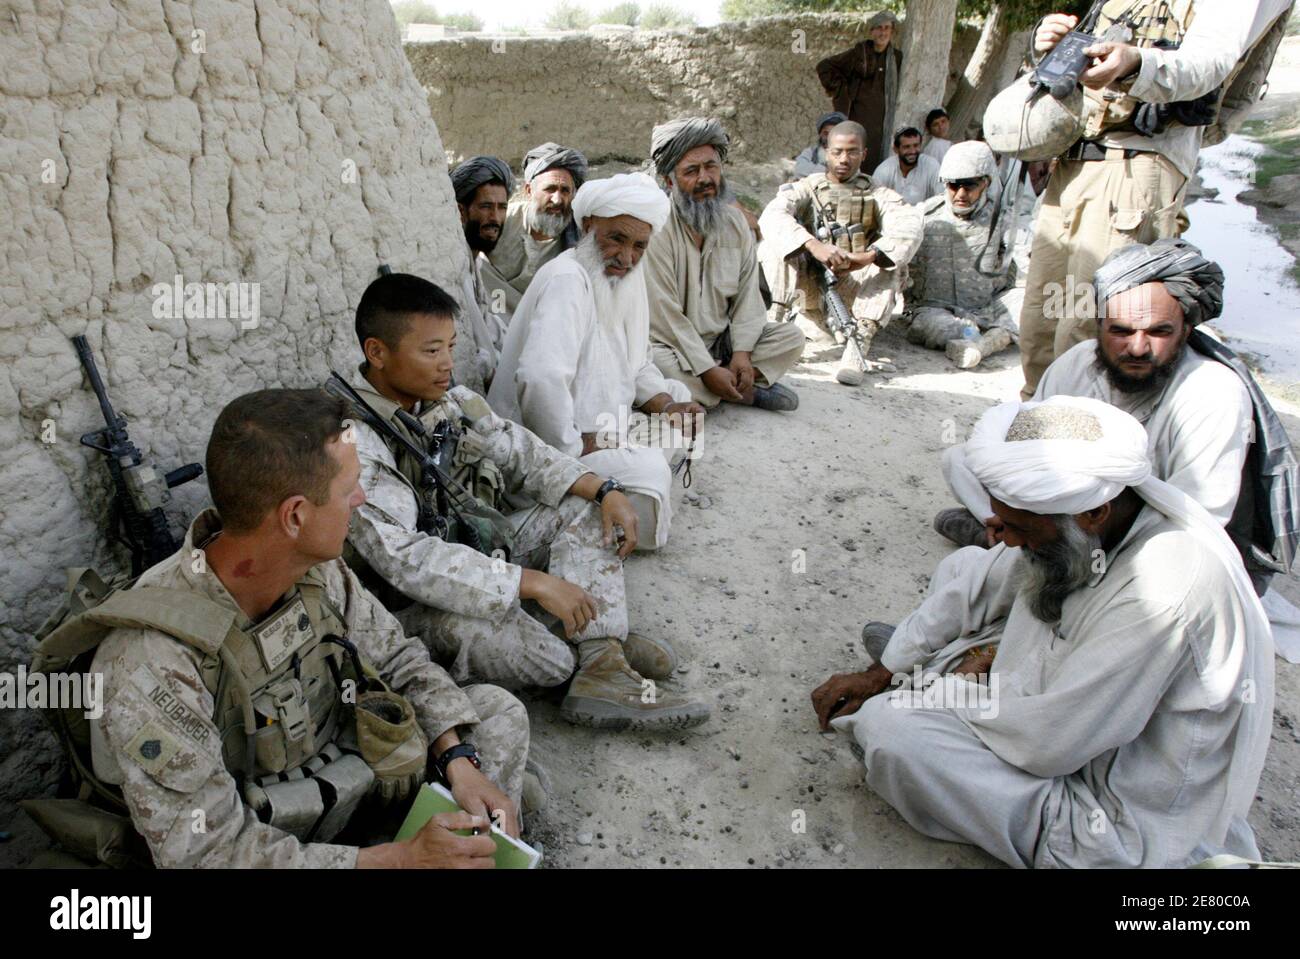 U.S. Marines from Foxtrot Company, 2nd Batallion, 8th Marines, meet local elders during a shura, or local council meeting, in Sorkhdoz in Afghanistan's lower Helmand River Valley July 5, 2009. Thousands of Marines advanced into the valley by helicopter and ground this week in the biggest military offensive of Barack Obama's presidency.    REUTERS/Peter Graff  (AFGHANISTAN MILITARY POLITICS) Stock Photo